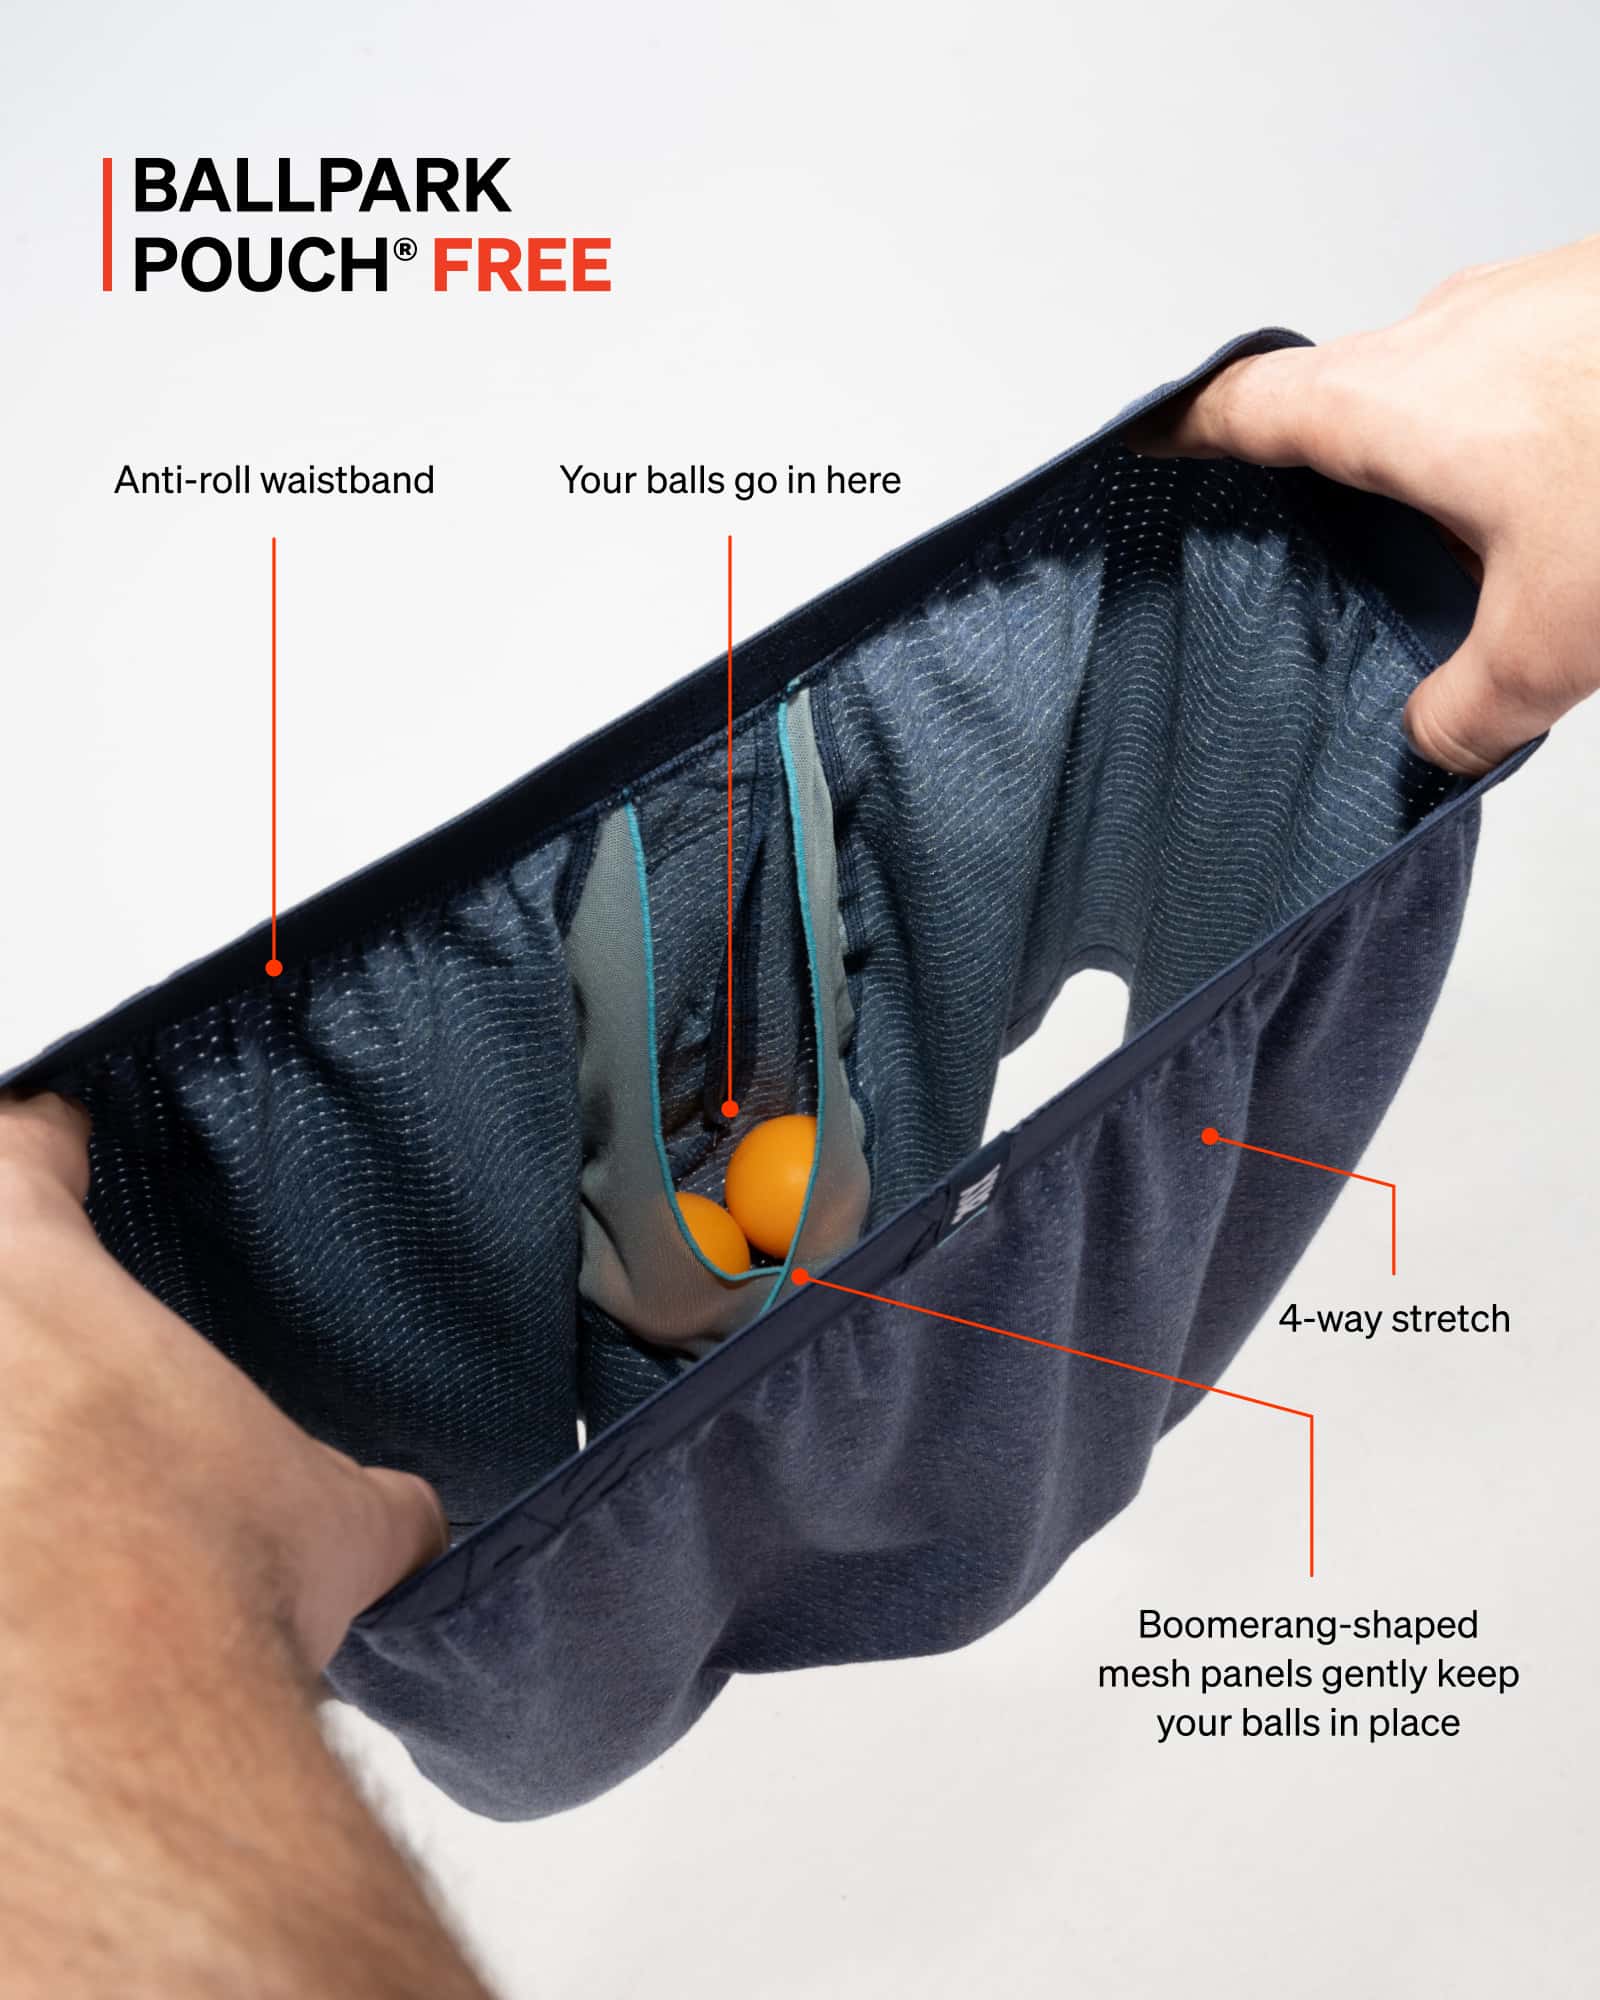 SAXX Underwear BallPark Pouch FREE with Flat Out Seams and Three-D Fit technology